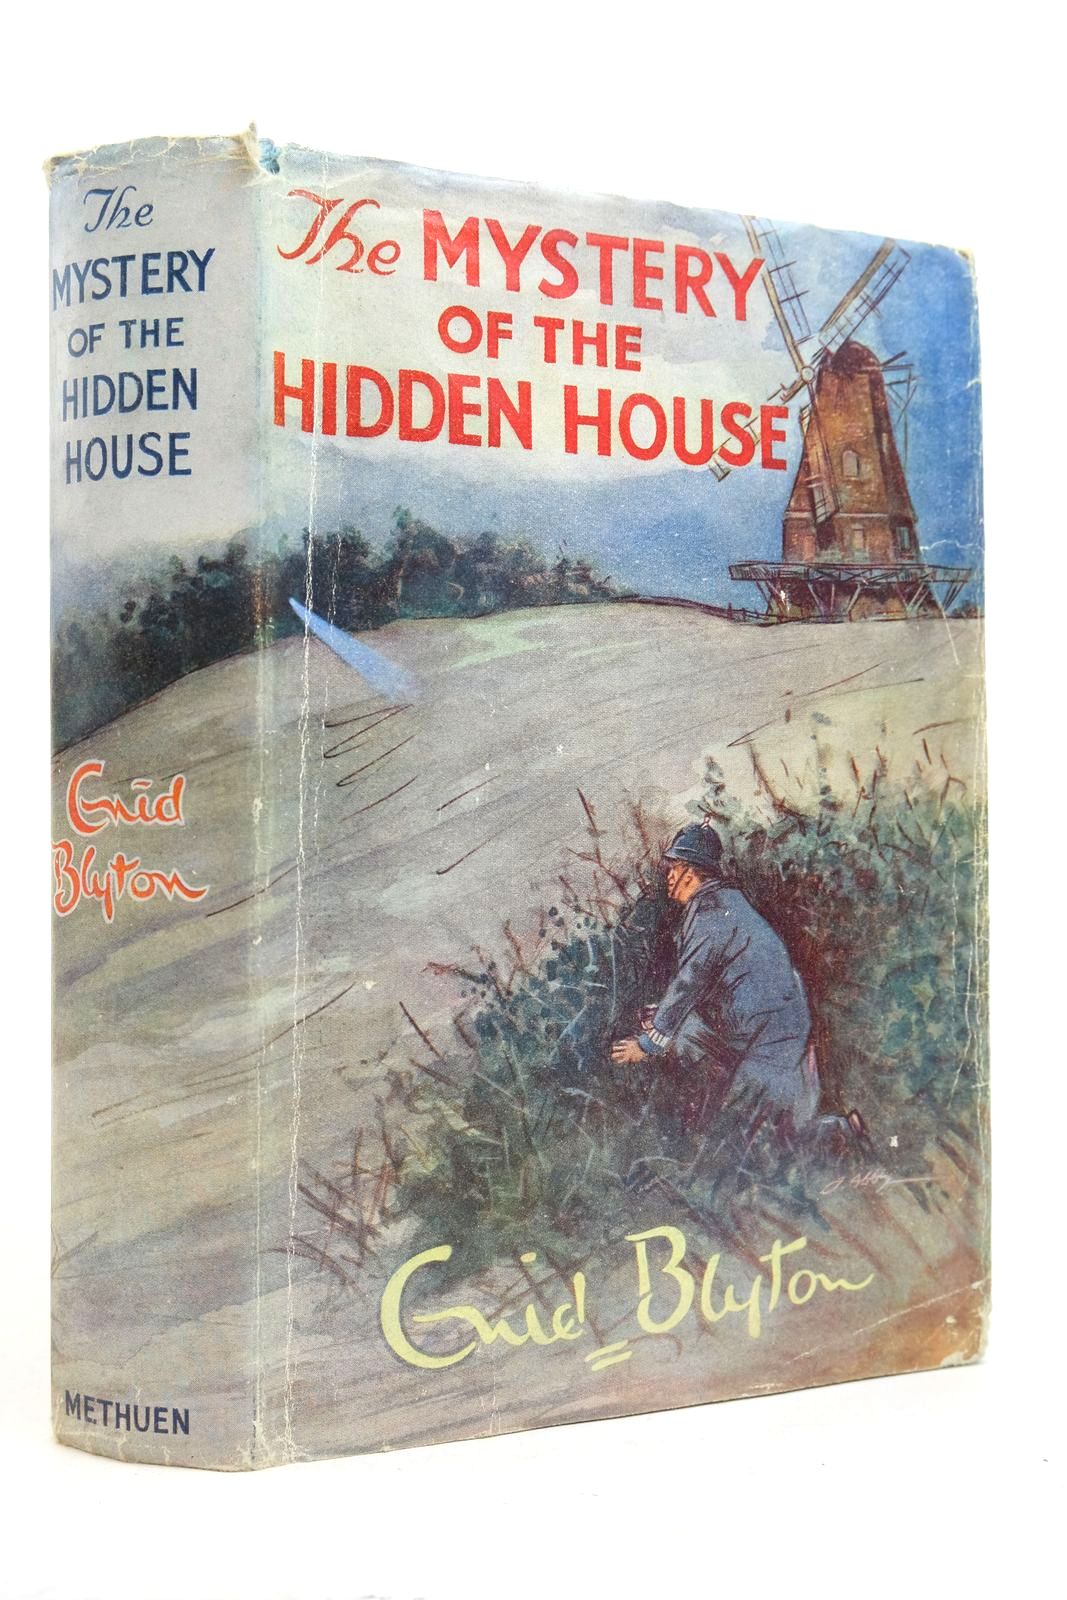 Photo of THE MYSTERY OF THE HIDDEN HOUSE written by Blyton, Enid illustrated by Abbey, J. published by Methuen & Co. Ltd. (STOCK CODE: 2140463)  for sale by Stella & Rose's Books